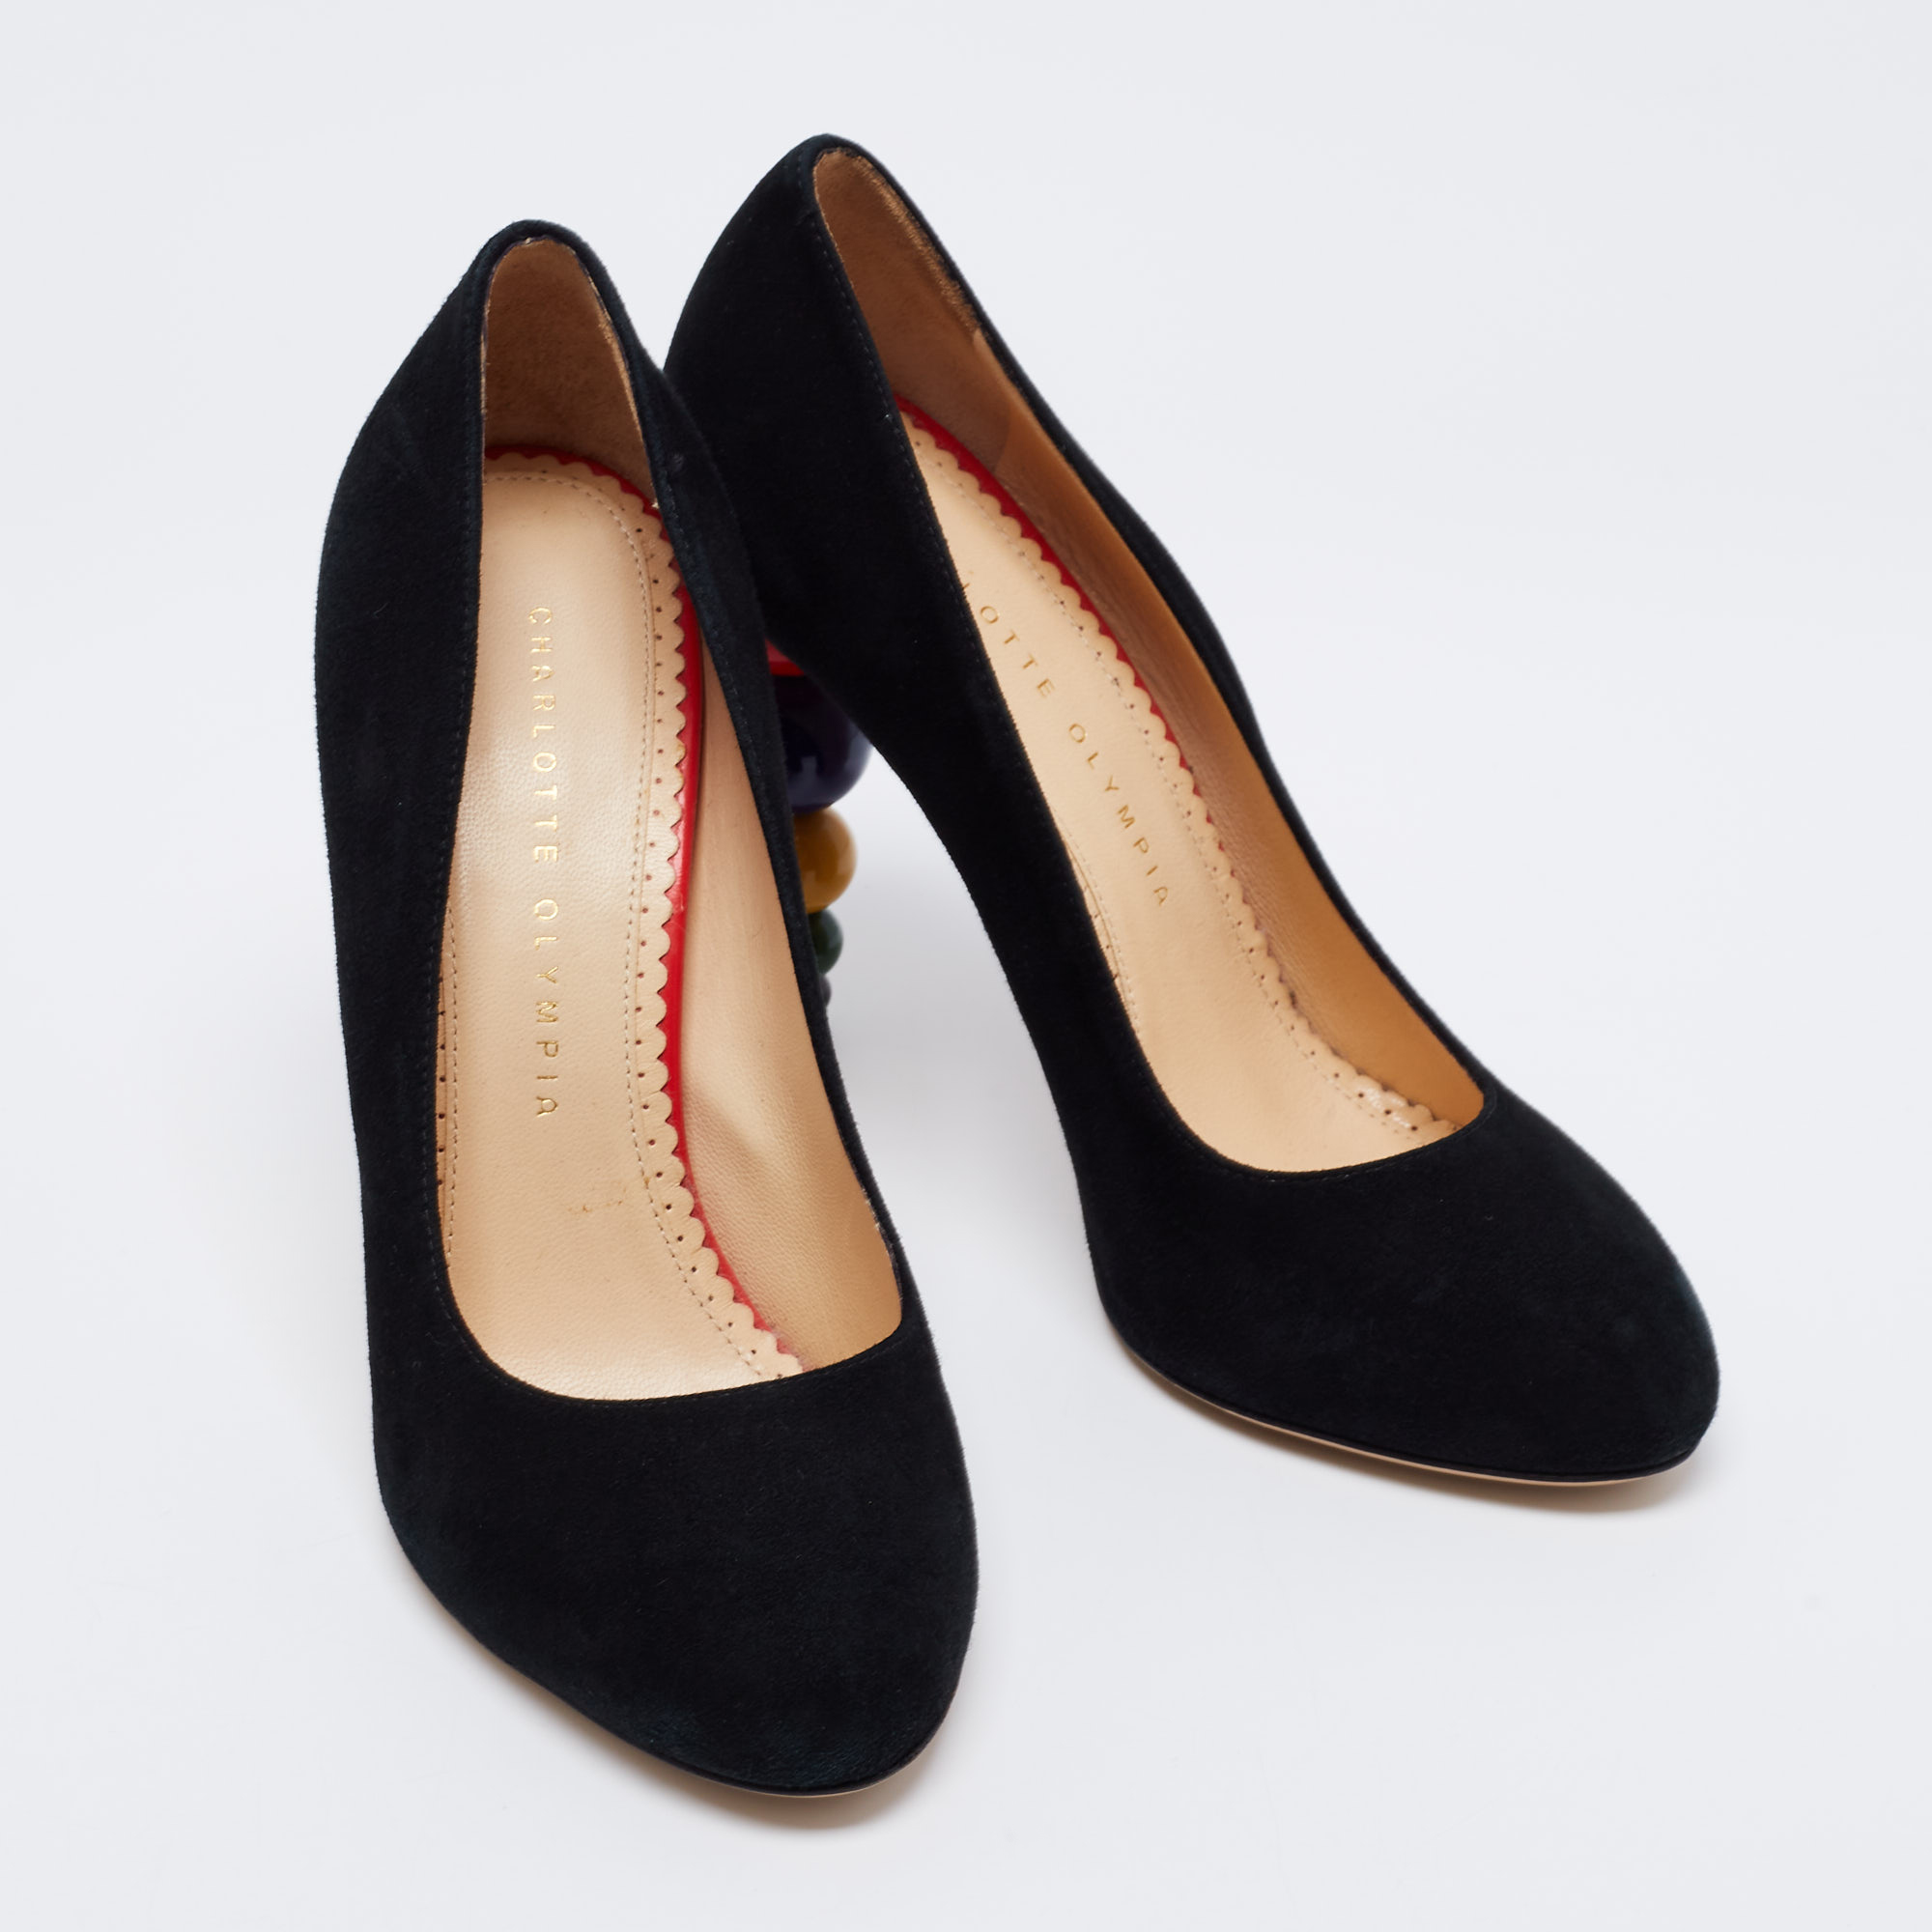 Charlotte Olympia Black Suede Mid Century Pumps Size 37.5